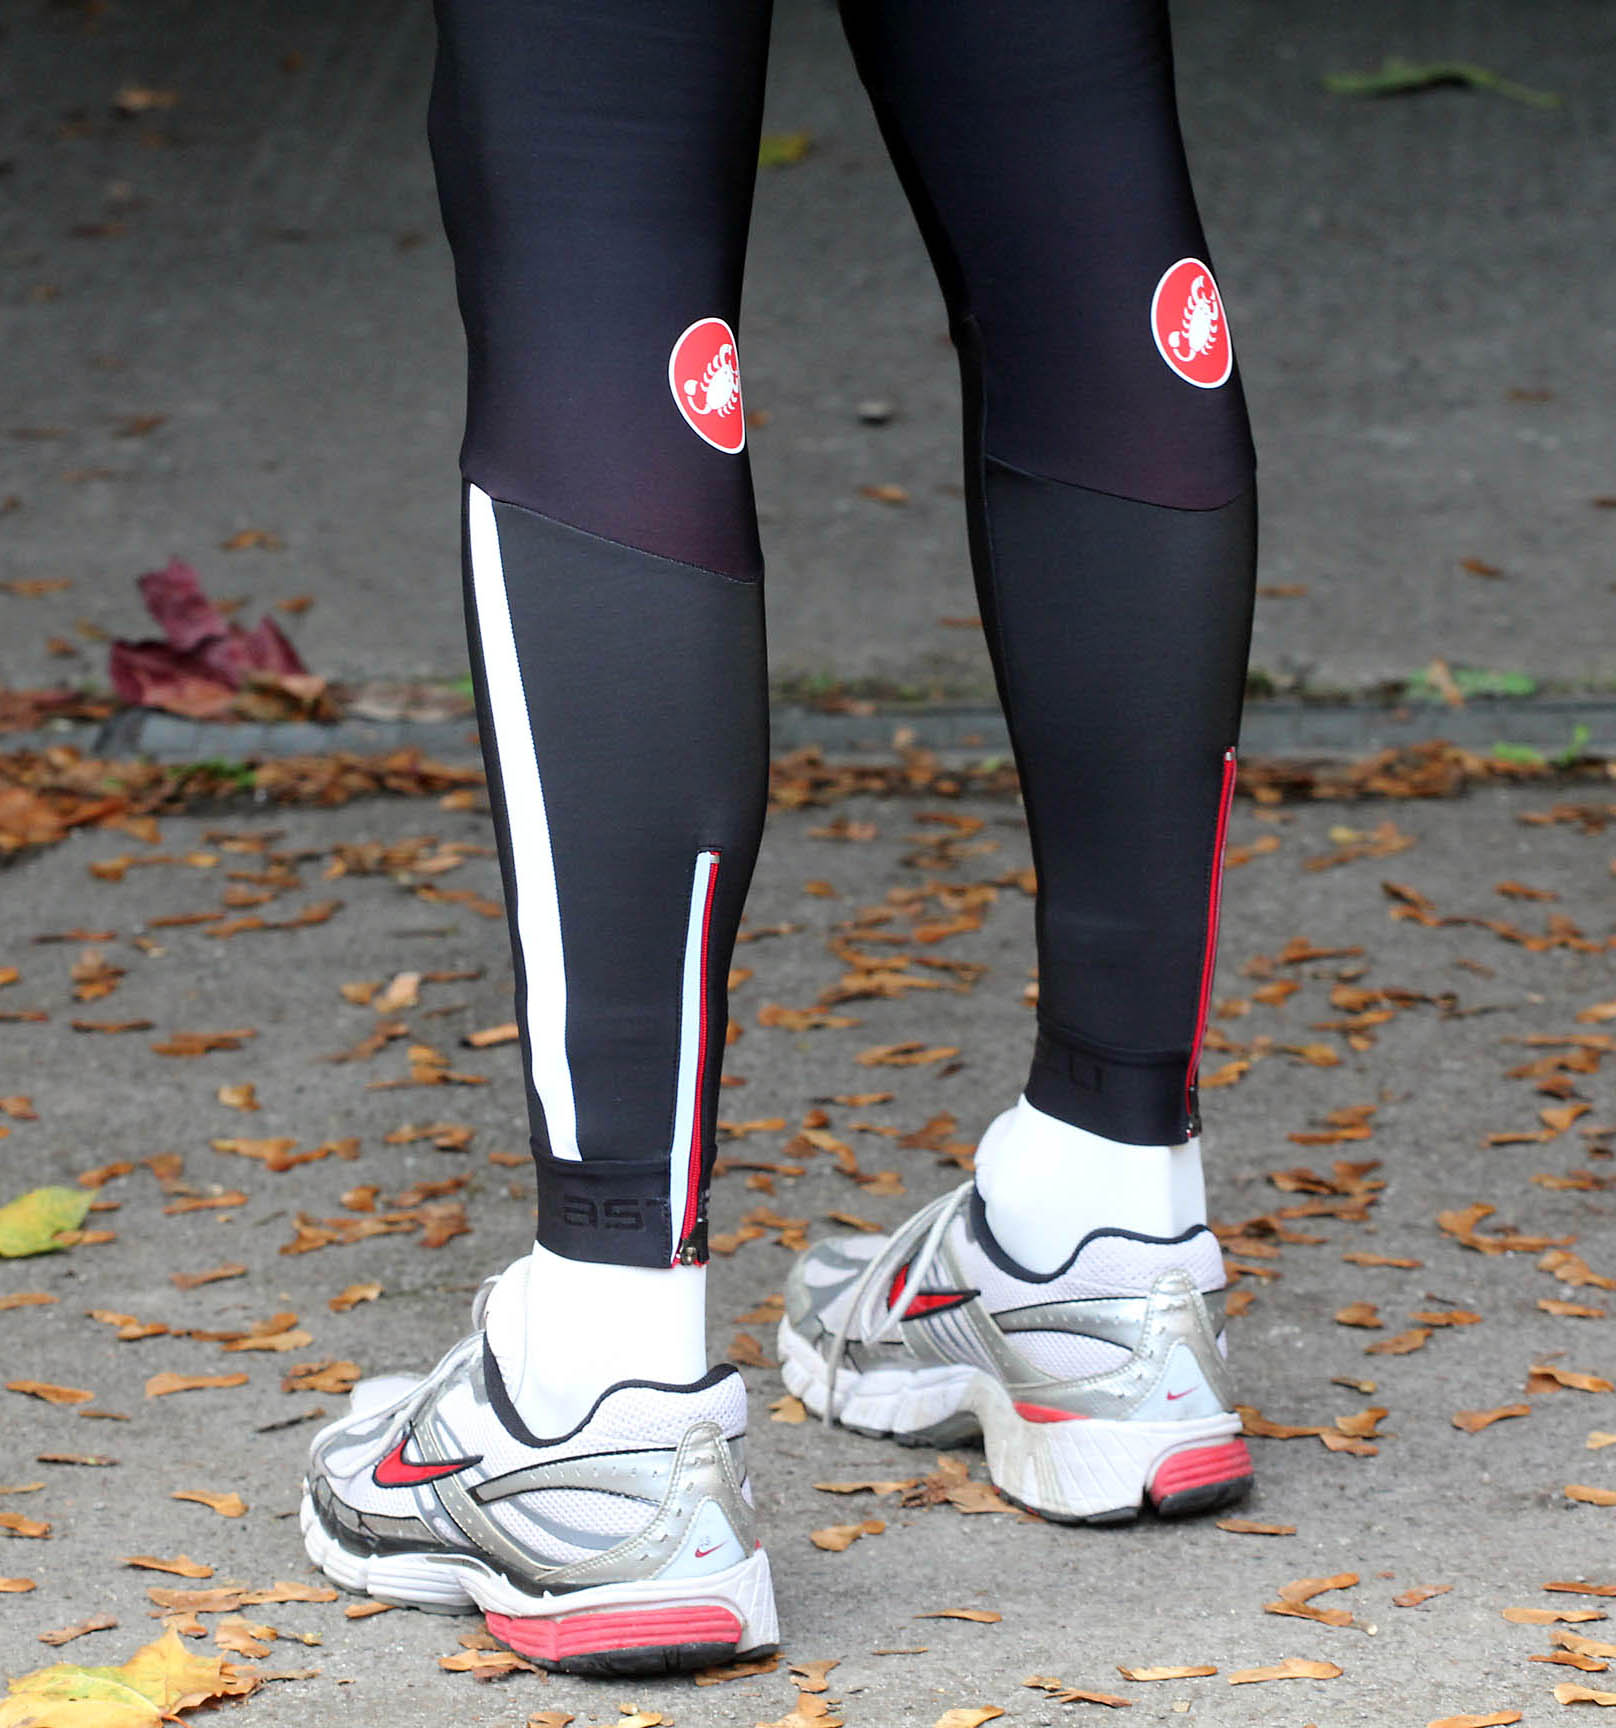 Review: Updated: Castelli Sorpasso Bibtights | road.cc